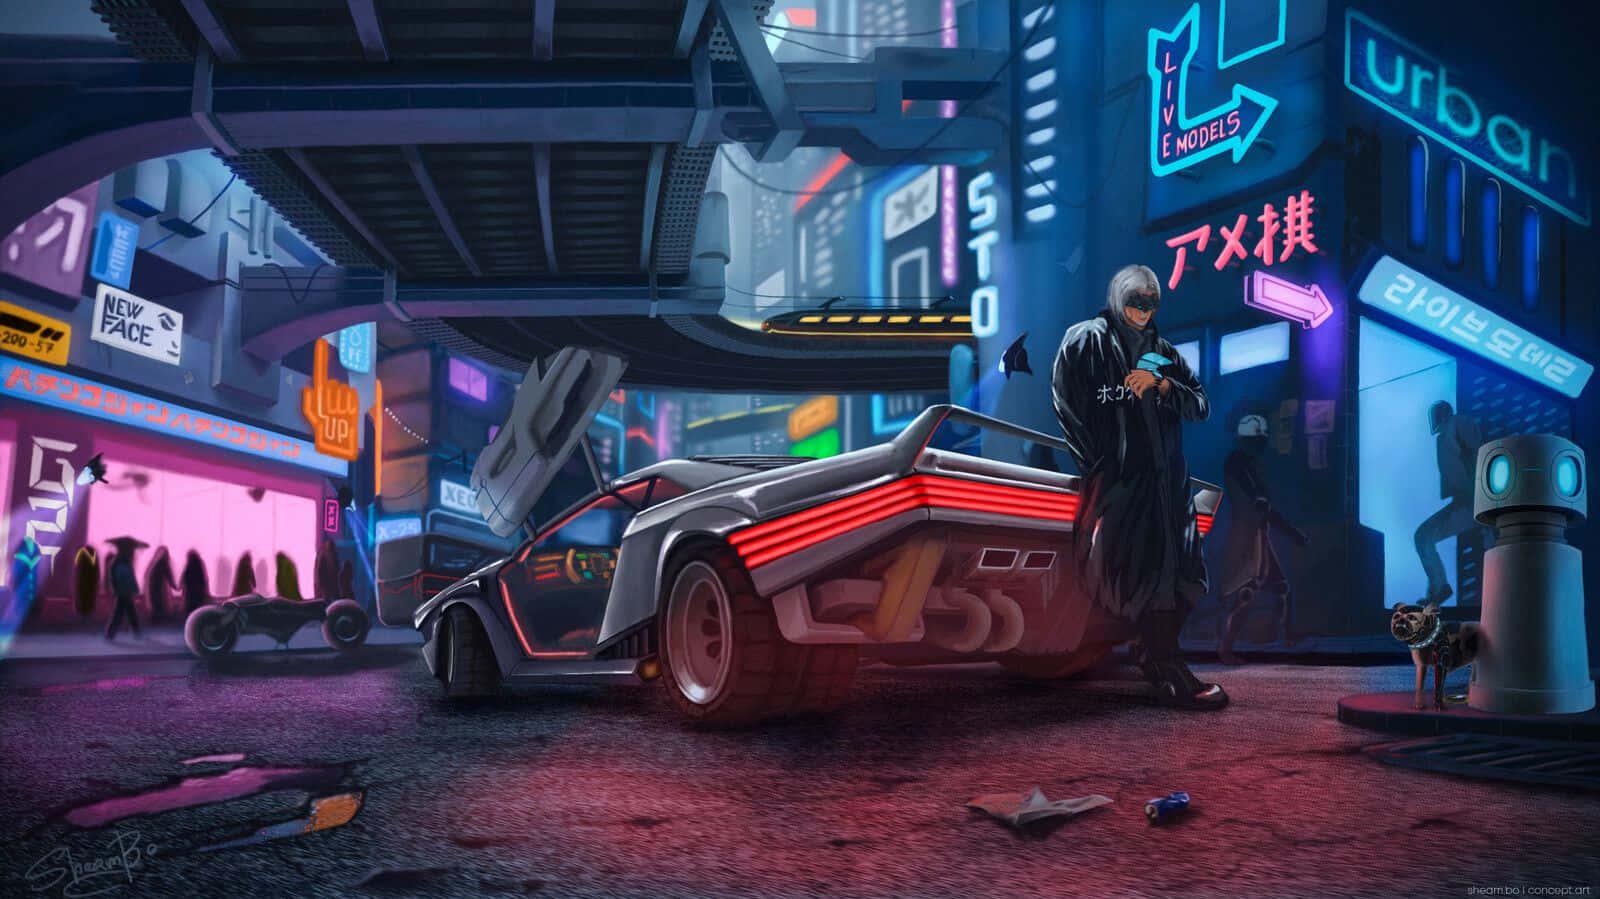 A Futuristic City With Car And Neon Lights Wallpaper